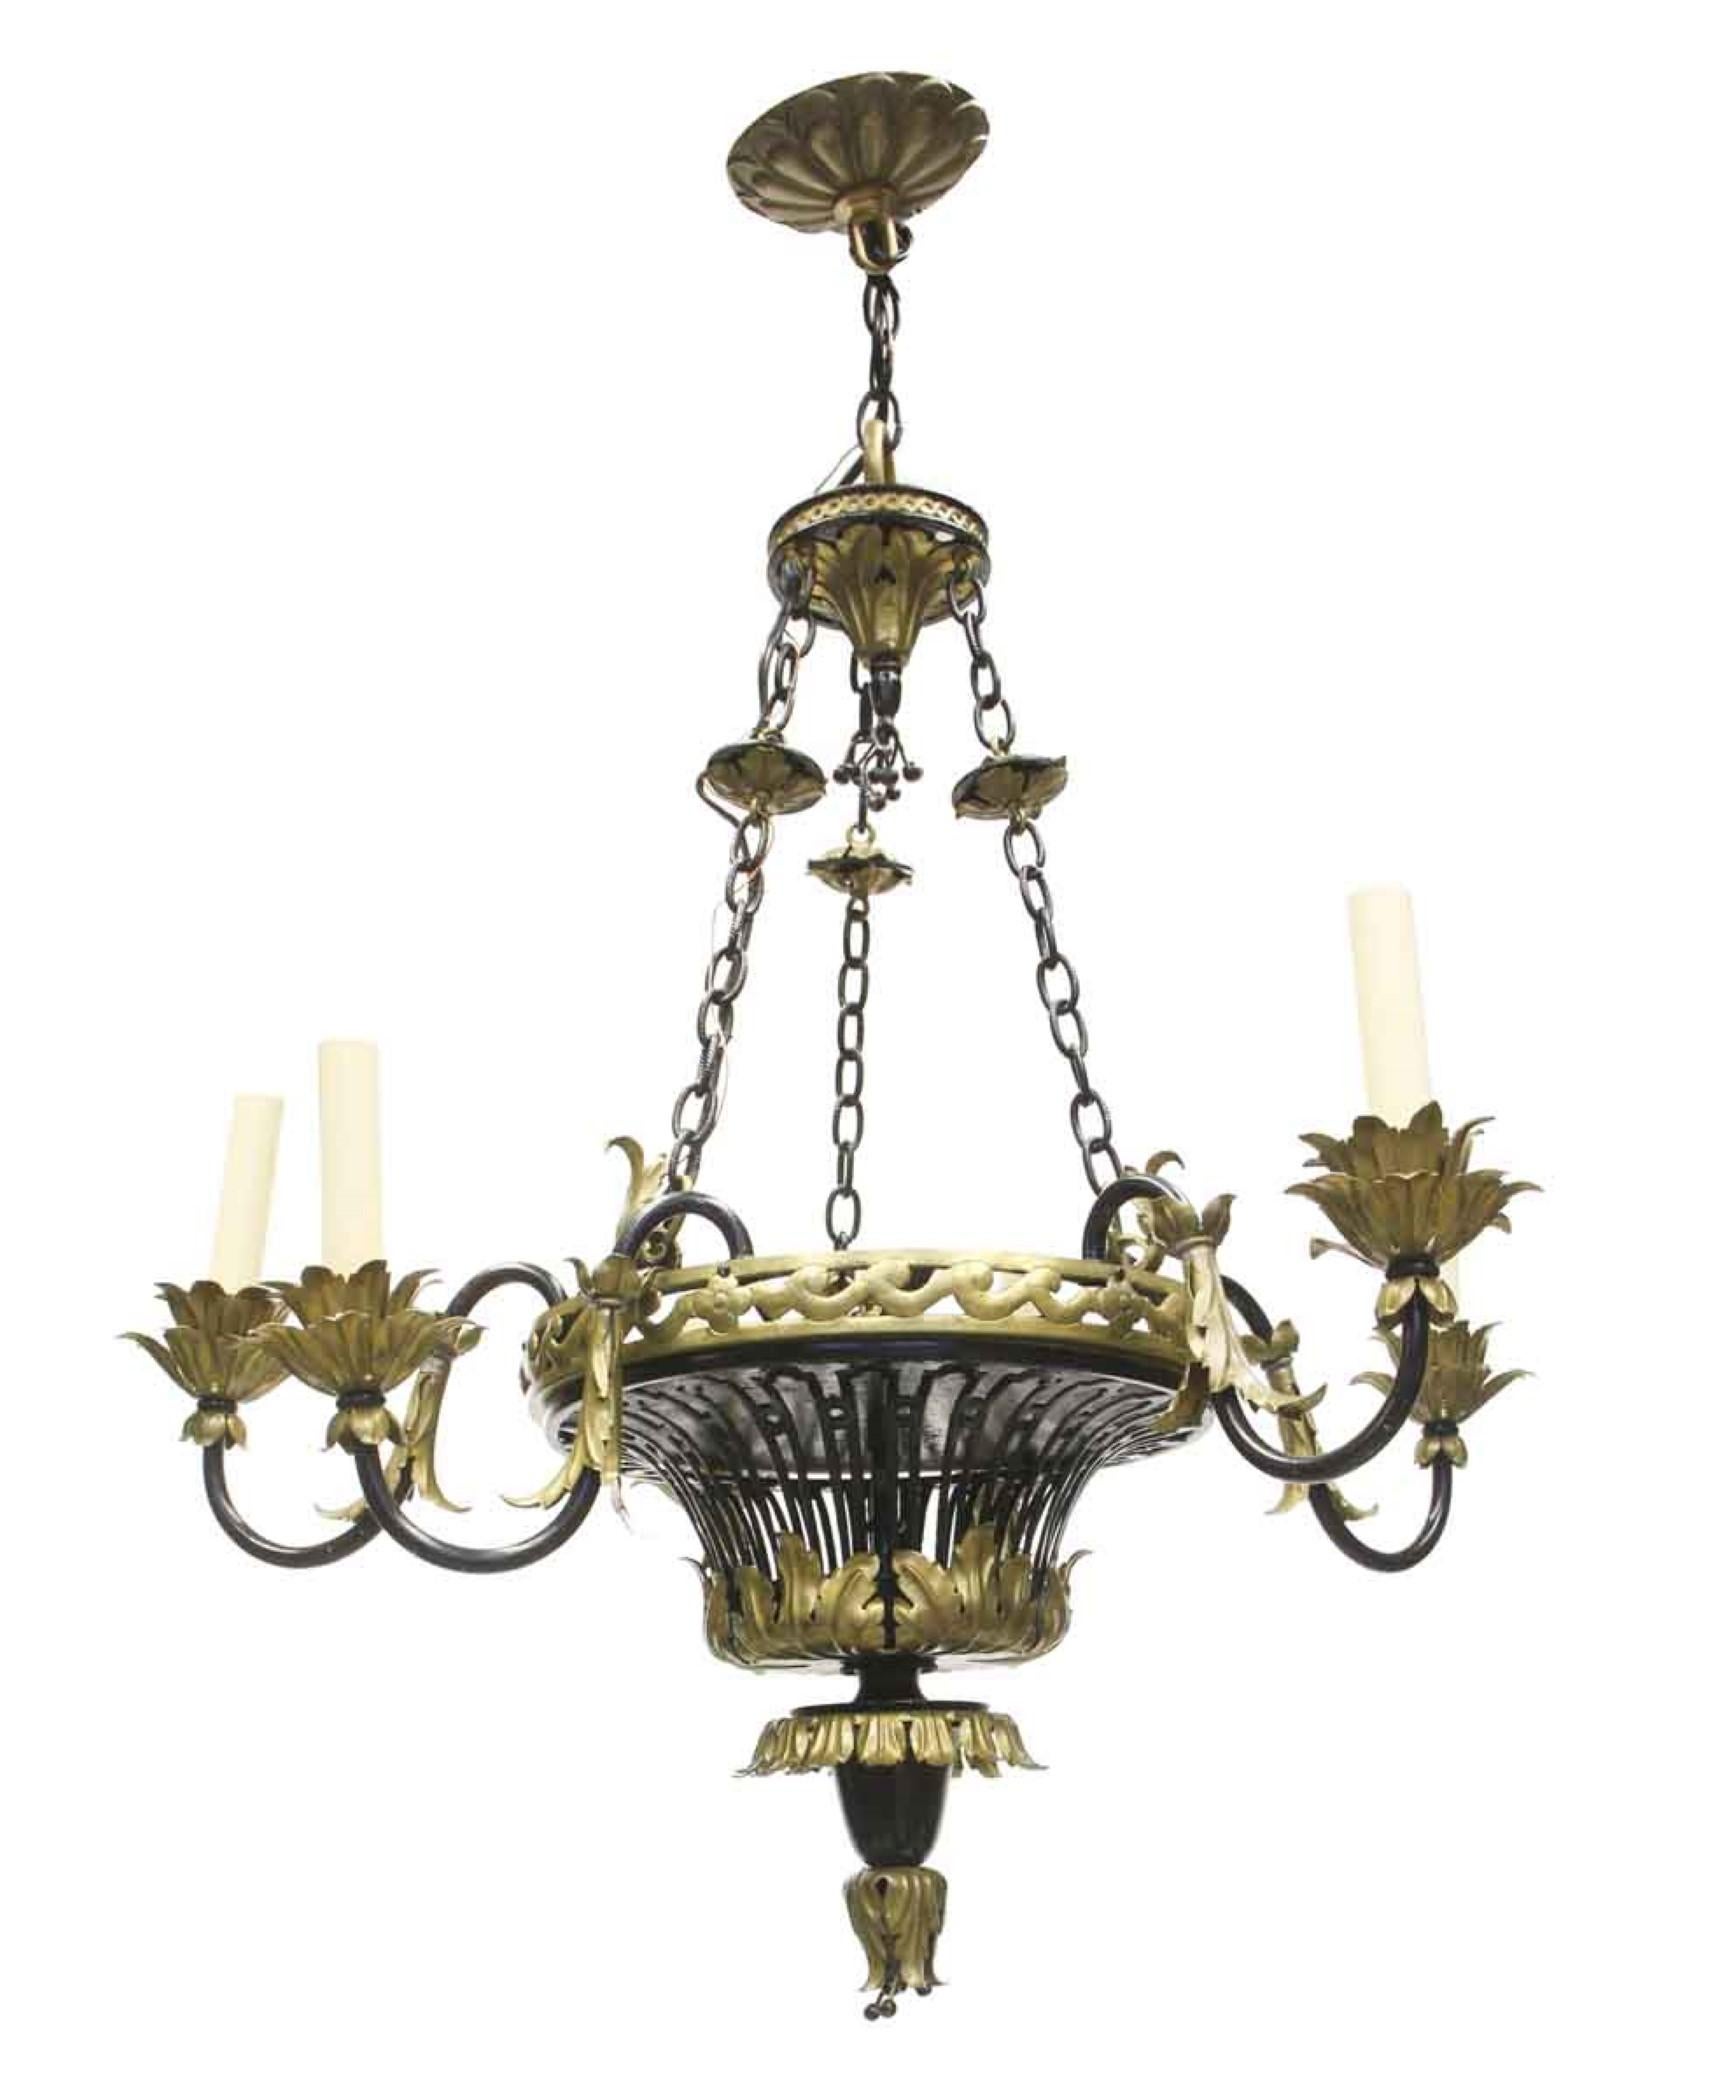 French 6 arms chandelier with gilt metal and done in a French Country style from the 1930s. Details include gilt leaves and finial. Cleaned and rewired. Please note, this item is located in one of our NYC locations.